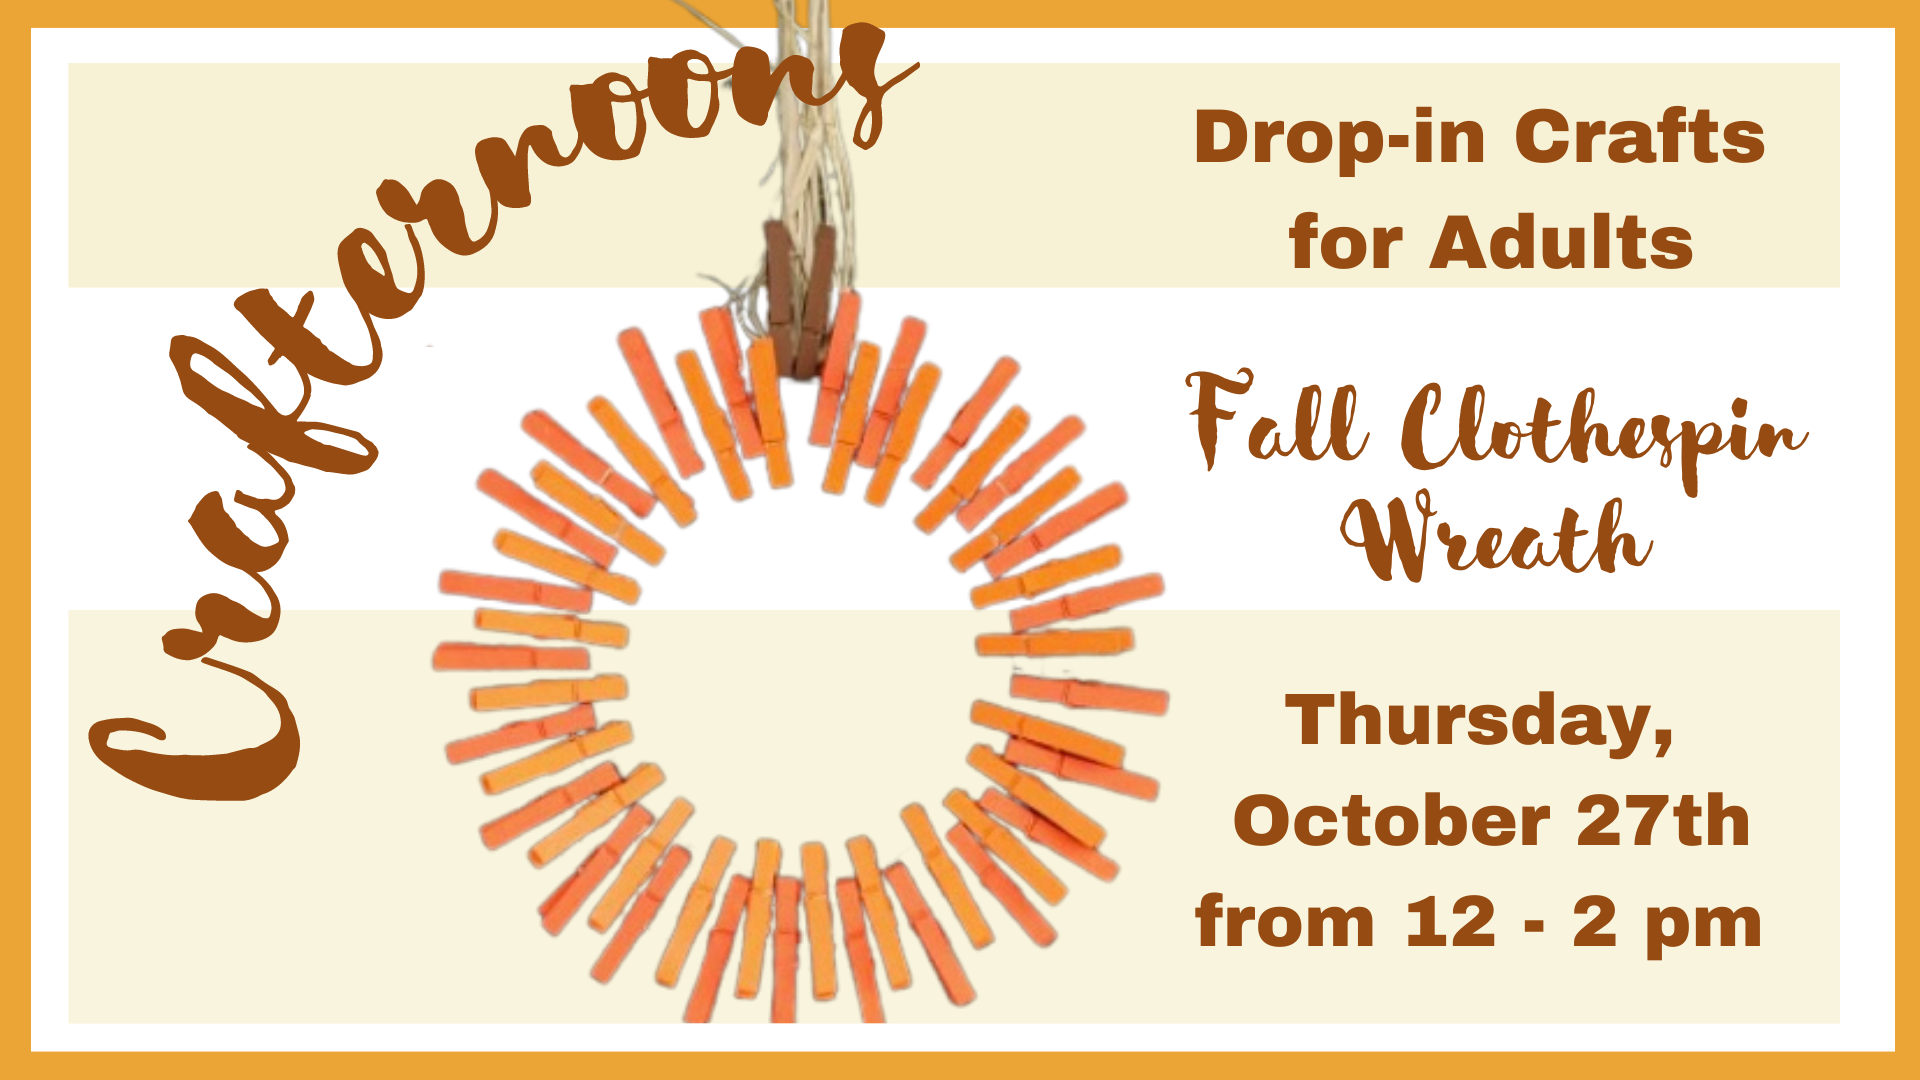 Crafternoon on Oct. 27th from 12-2 - Fall Clothespin Wreaths